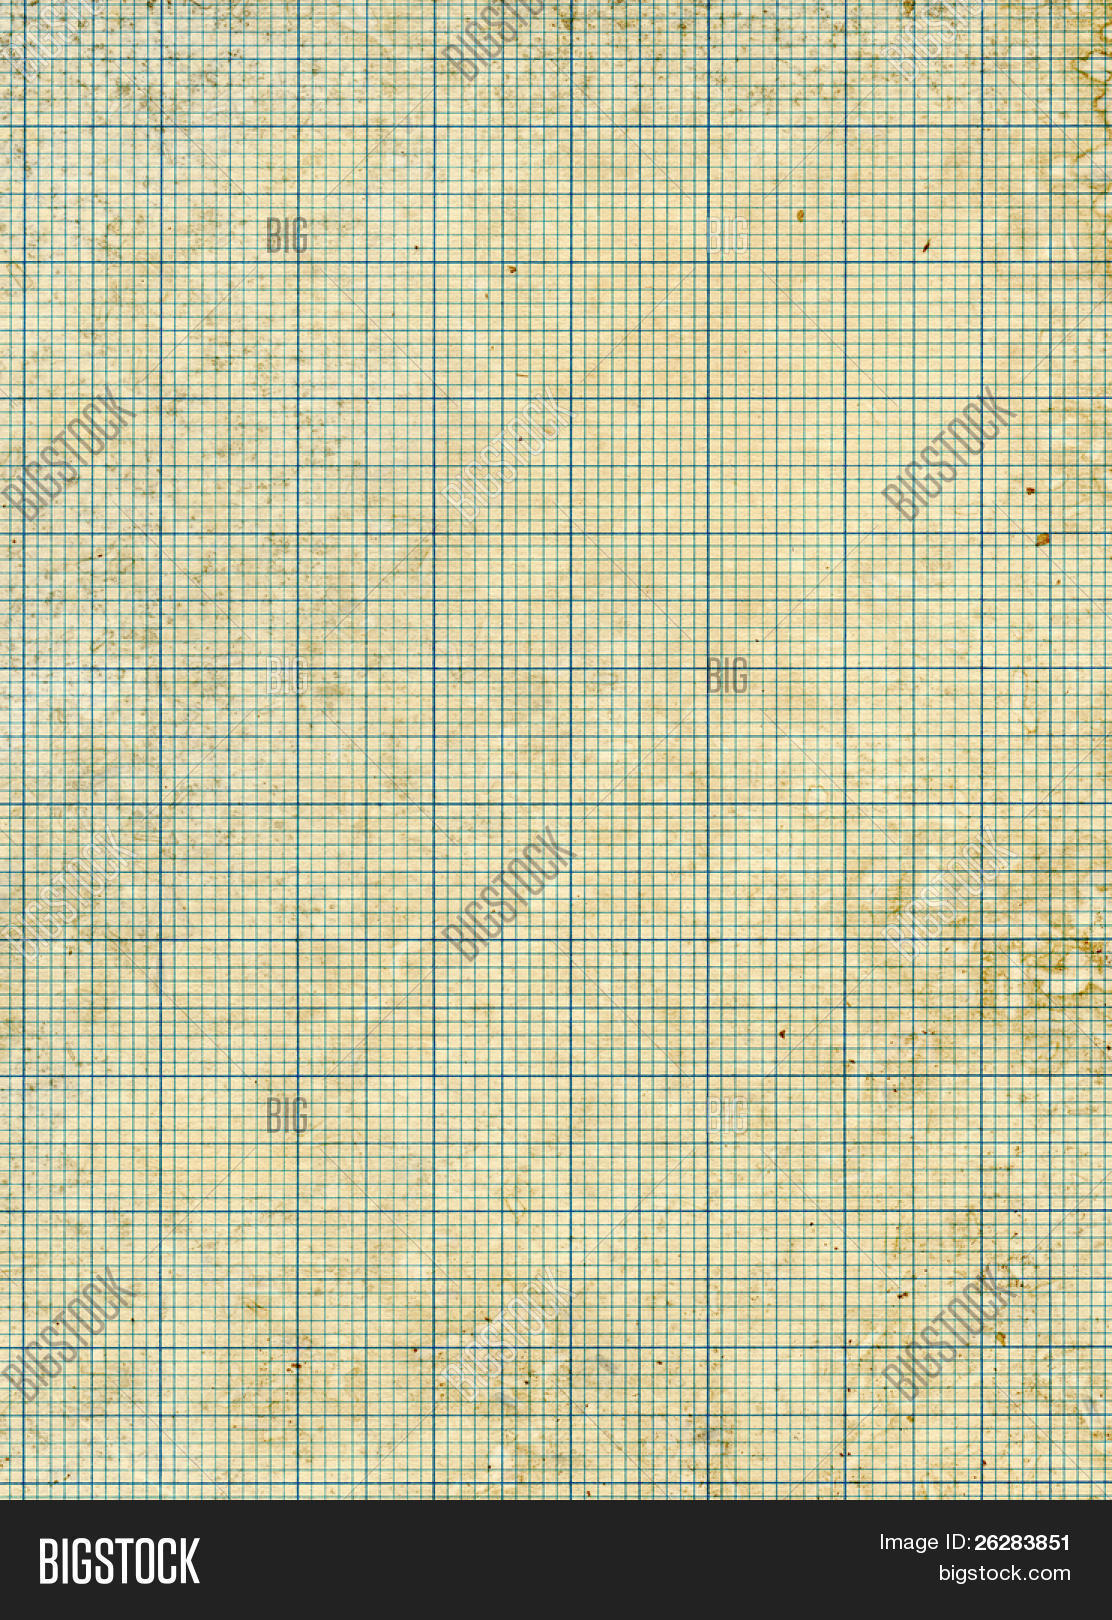 Old Vintage Stained Discolored Dirty Graph Paper Image Stock Photo 